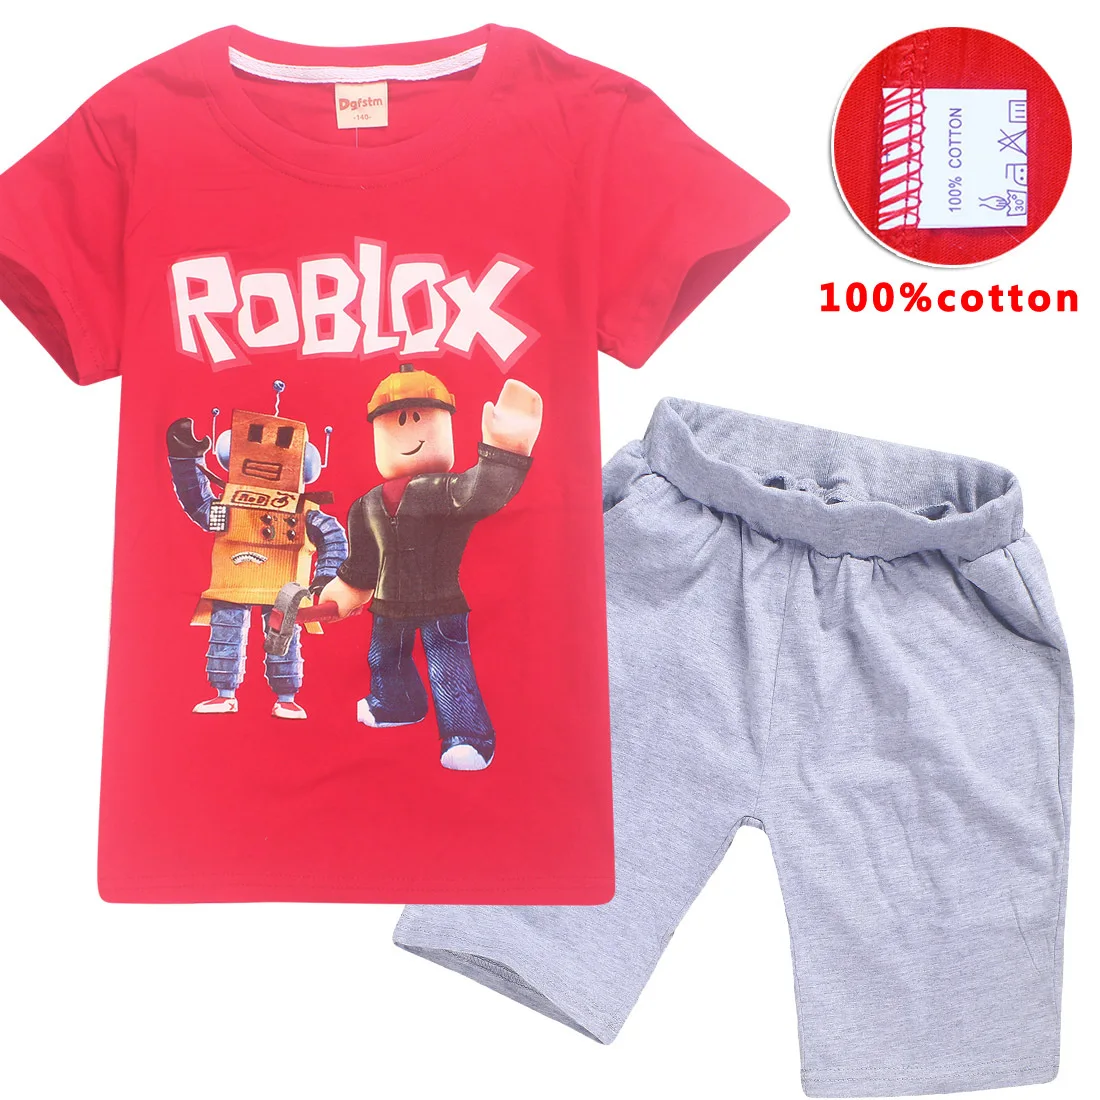 Z Y 6 14years Kids Fashion 2018 Summer Roblox Costume Teenager Boys Clothing Set T Shirt Tops Shorts Pants 2pcs Sets Kinder Nova Buy At The Price Of 13 75 In Aliexpress Com Imall Com - children boys clothes 2018 winter girls clothes roblox costume